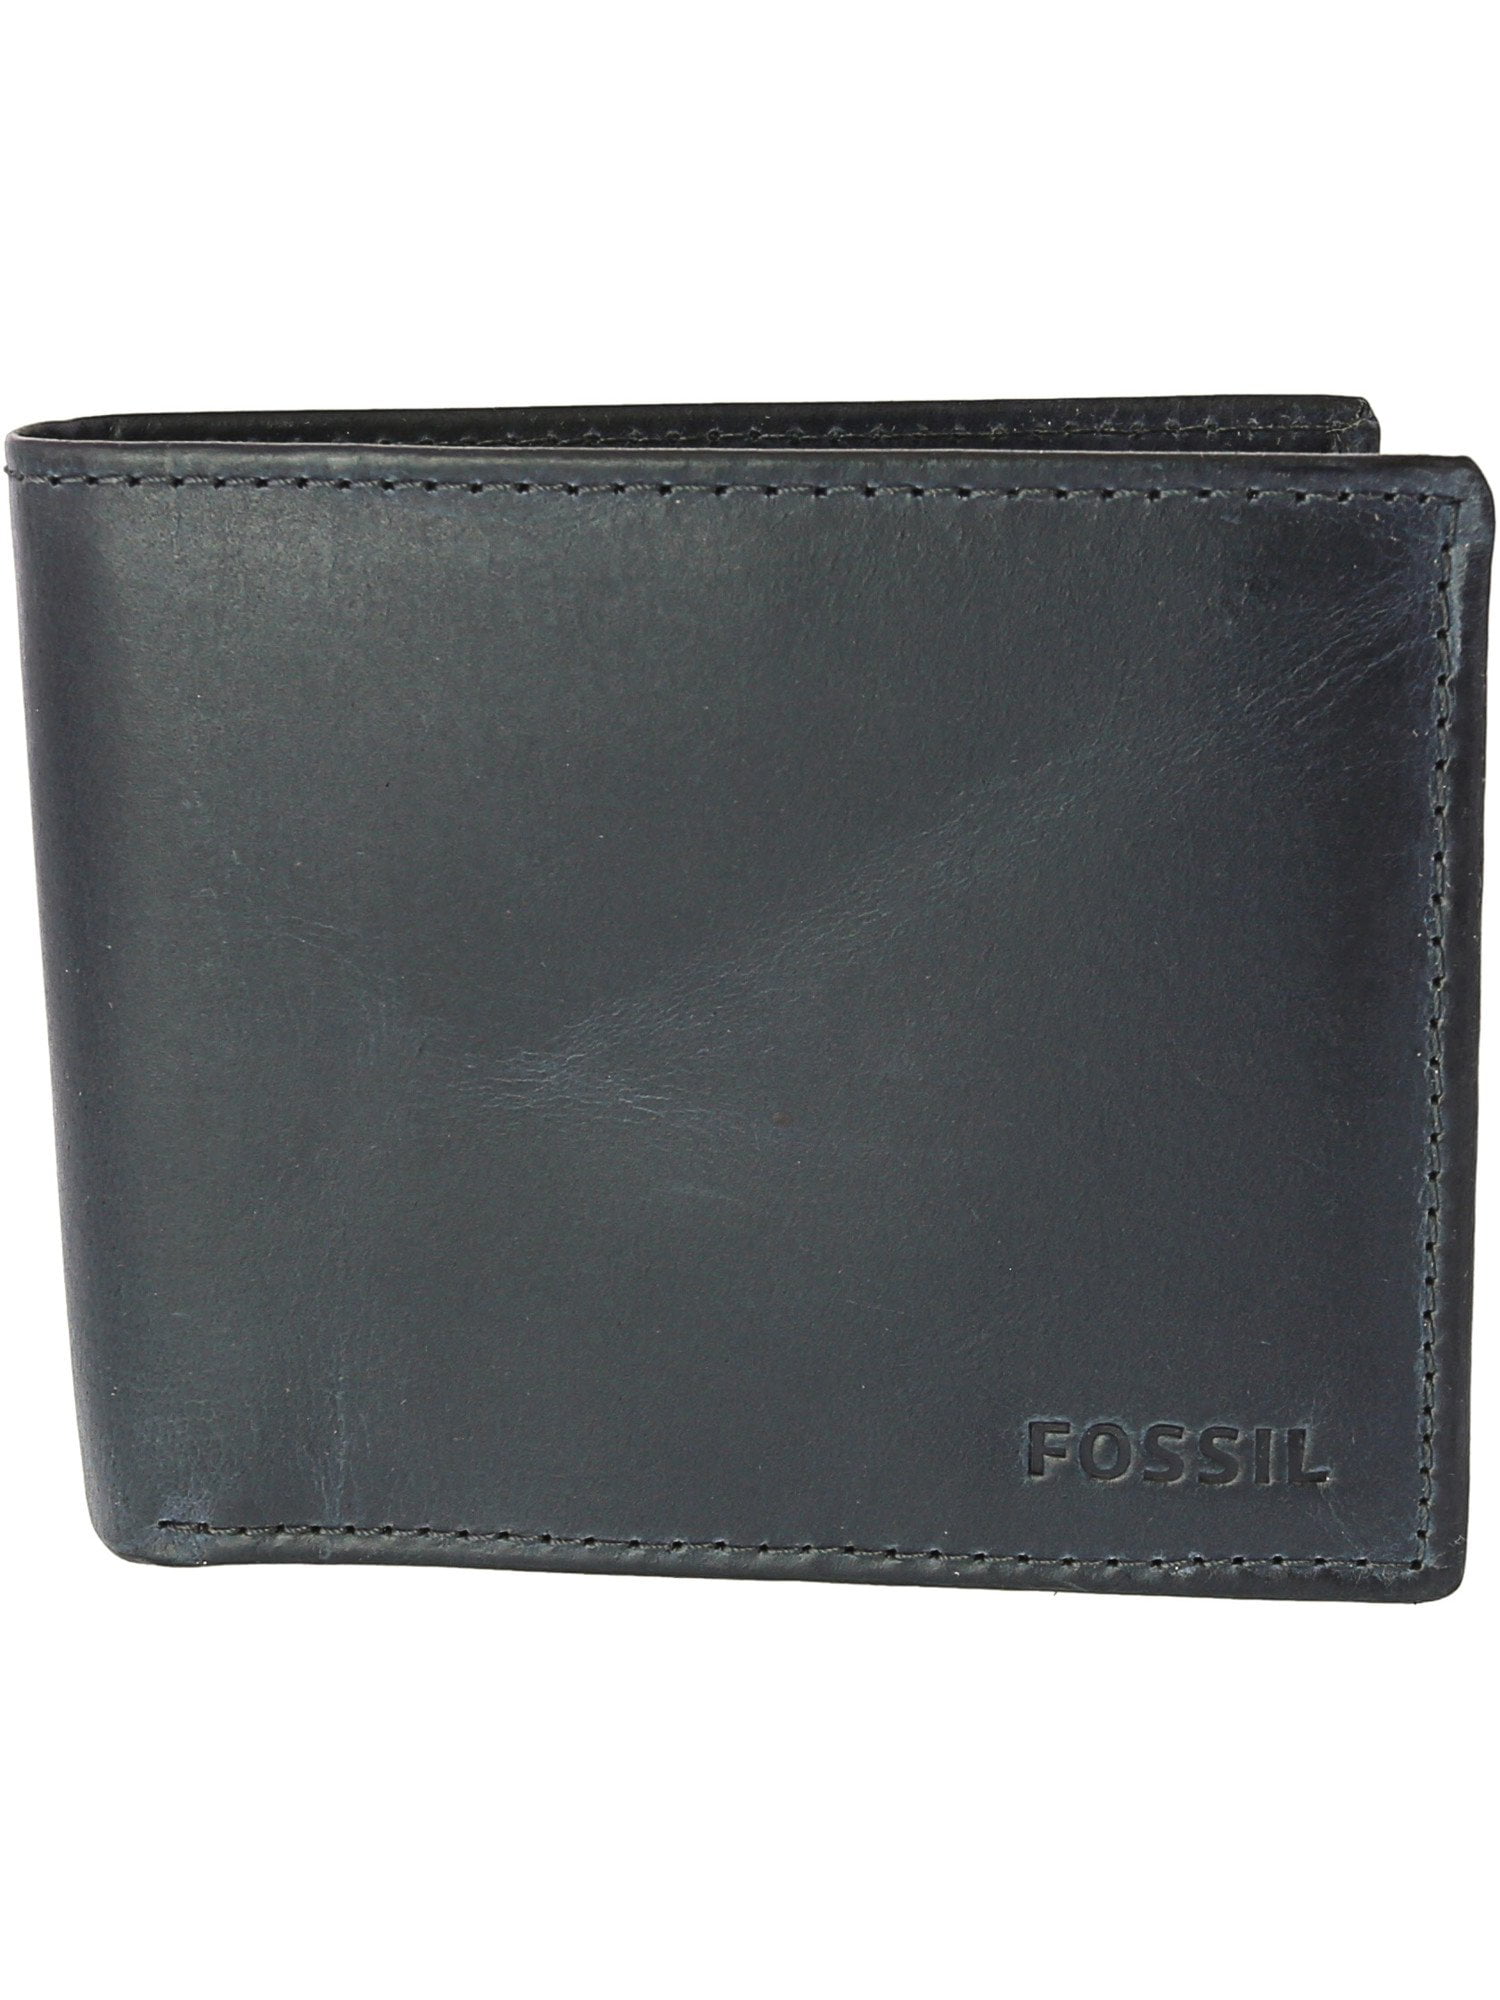 Fossil® Derrick Leather Rfid Bifold With Flip Id Wallet | The Art of ...